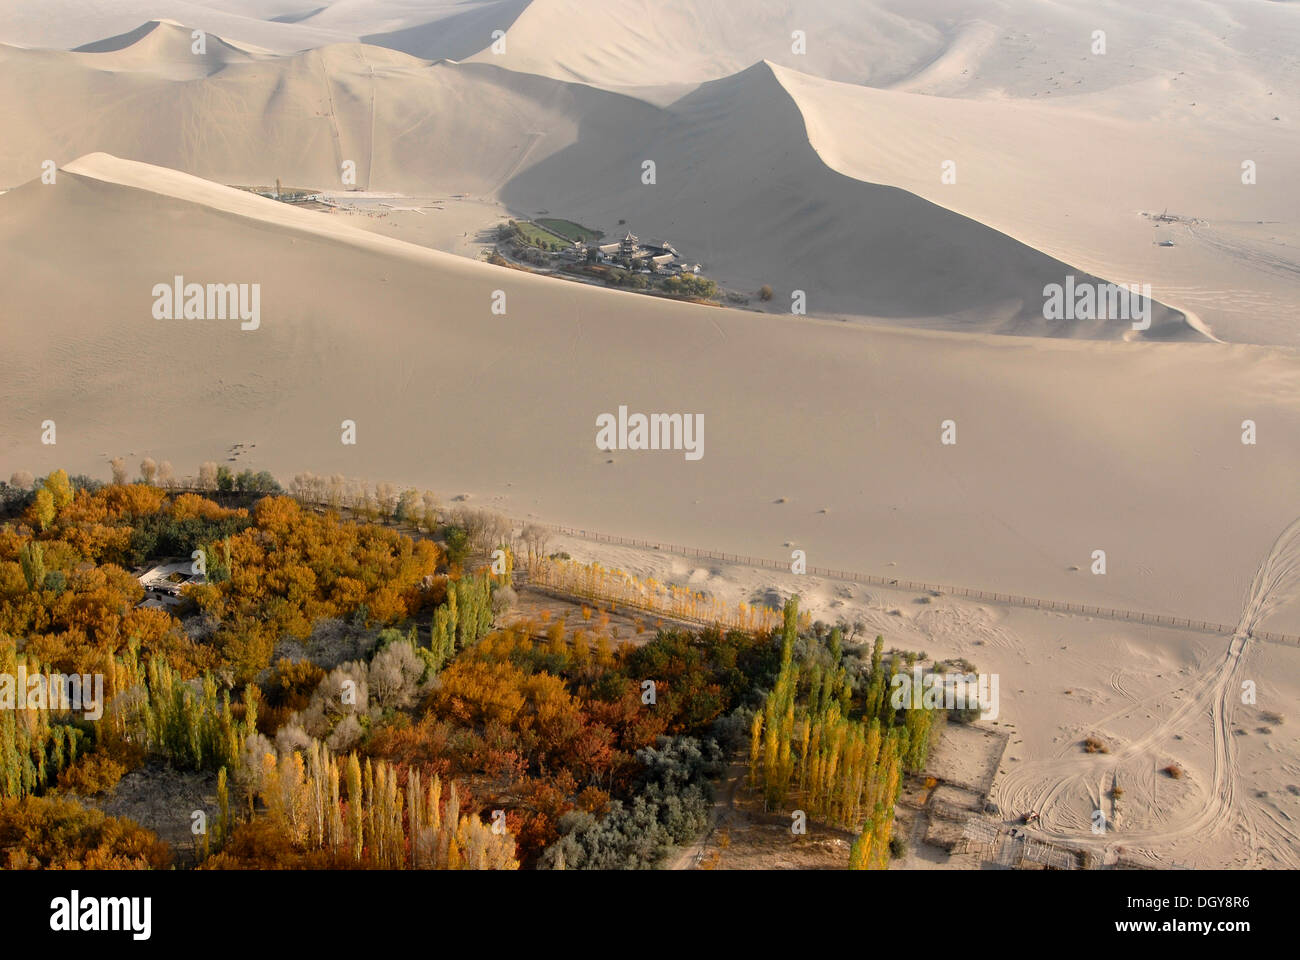 Aerial view of Crescent Lake and the giant sand dunes in the Gobi Desert, Silk Road, Dunhuang, in Gansu, China, Asia Stock Photo